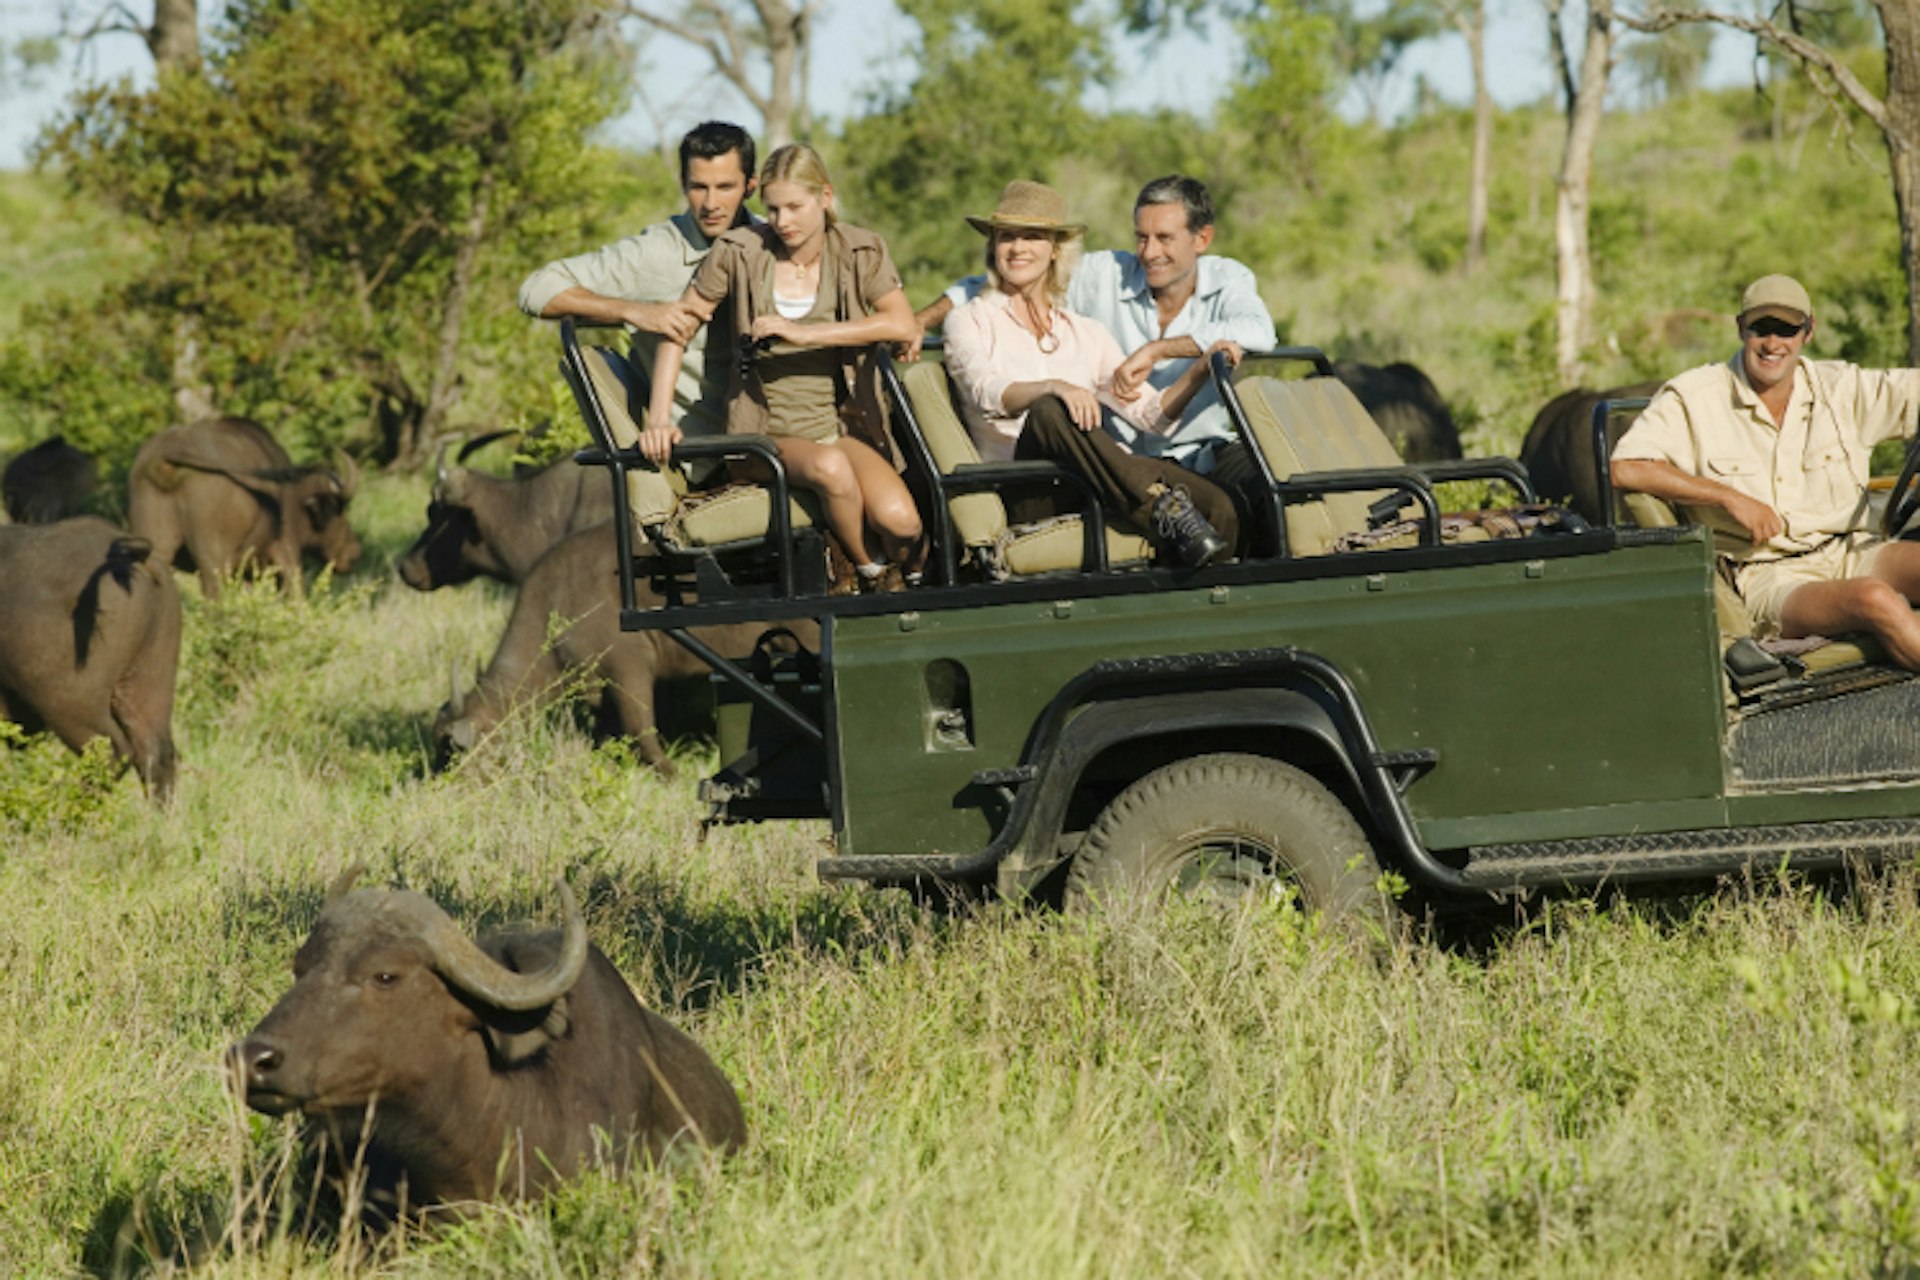 Never leave the car on a self-drive safari – unless you like the idea of being trampled by a water buffalo. Image by moodboard / Brand X Pictures / Getty Images